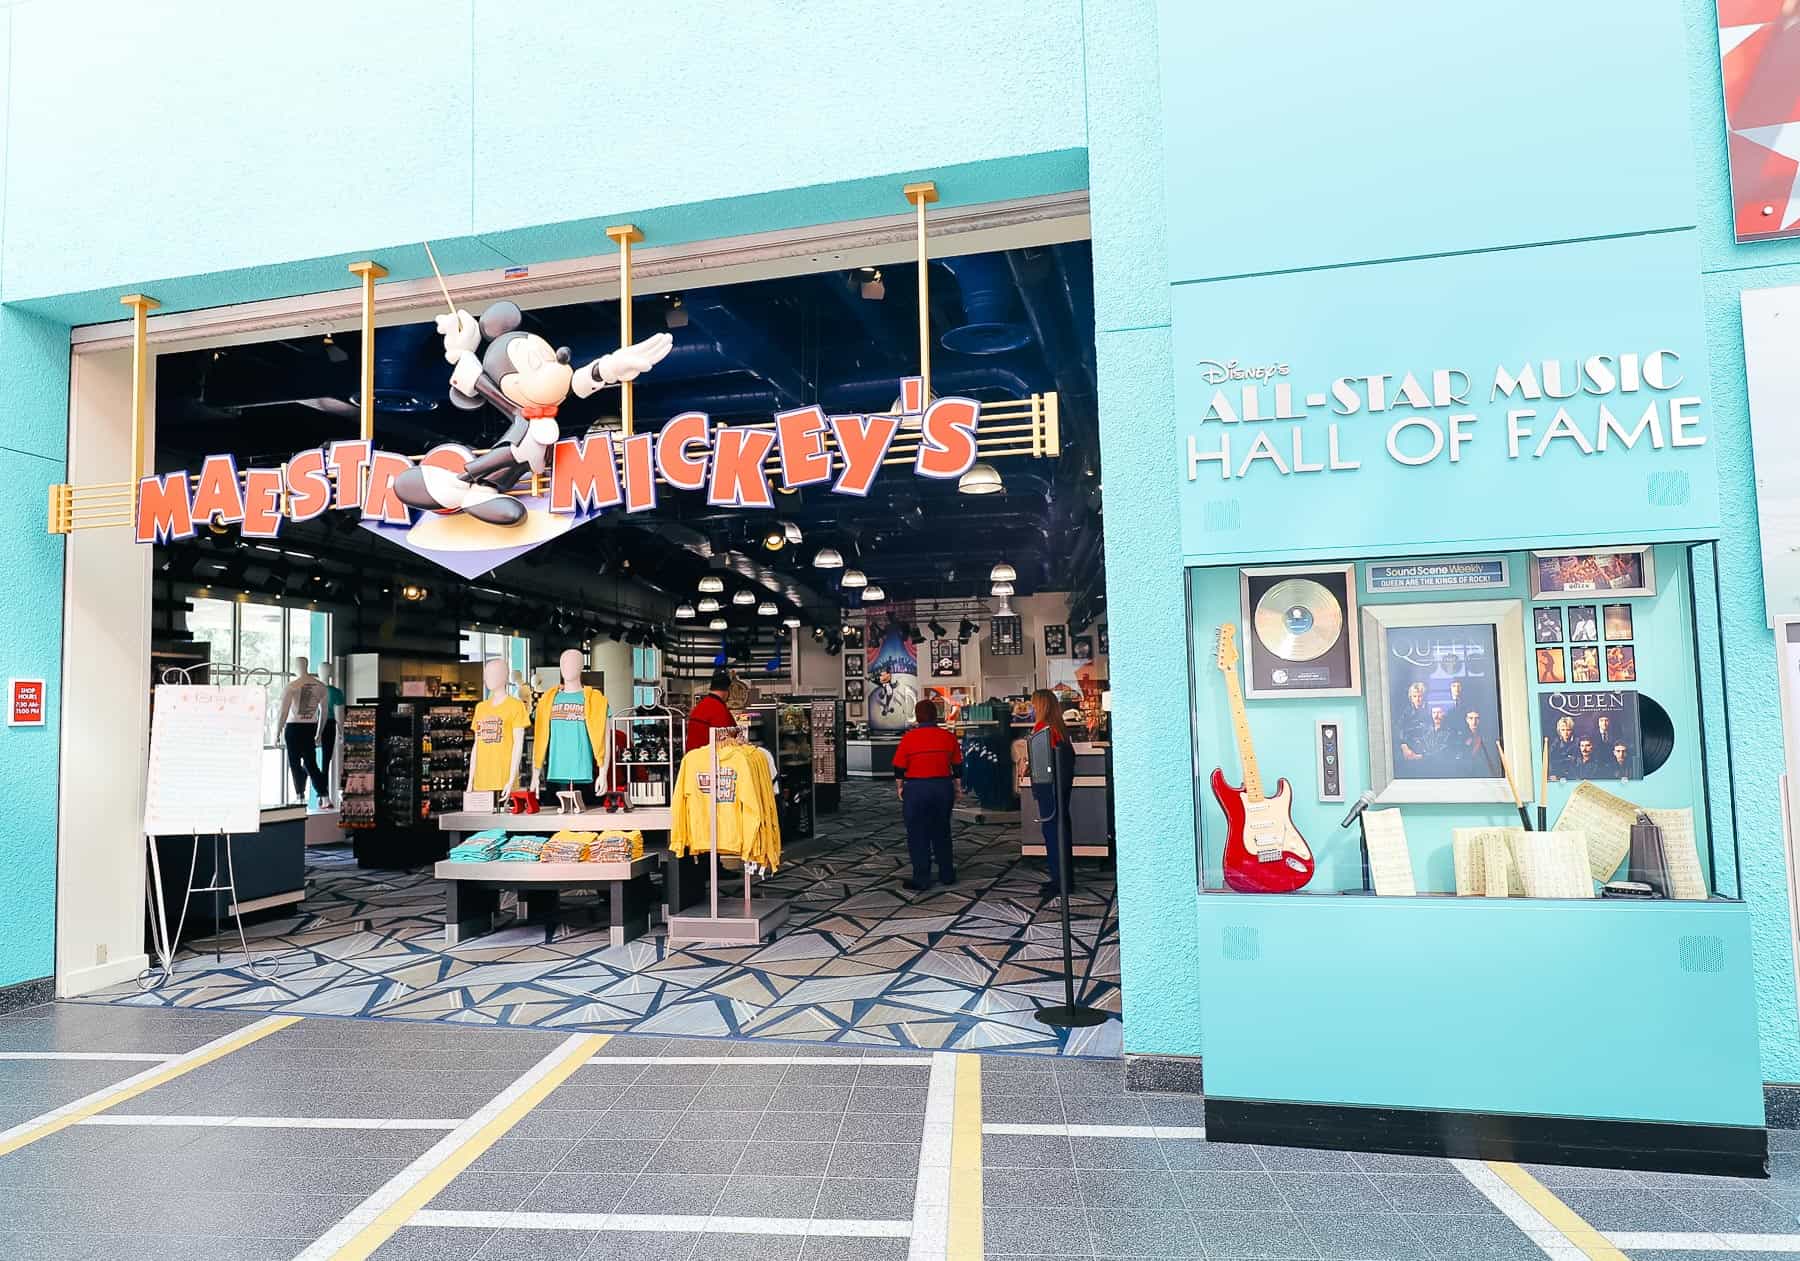 The entrance to Maestro Mickey's Gift shop with Mickey holding a baton 